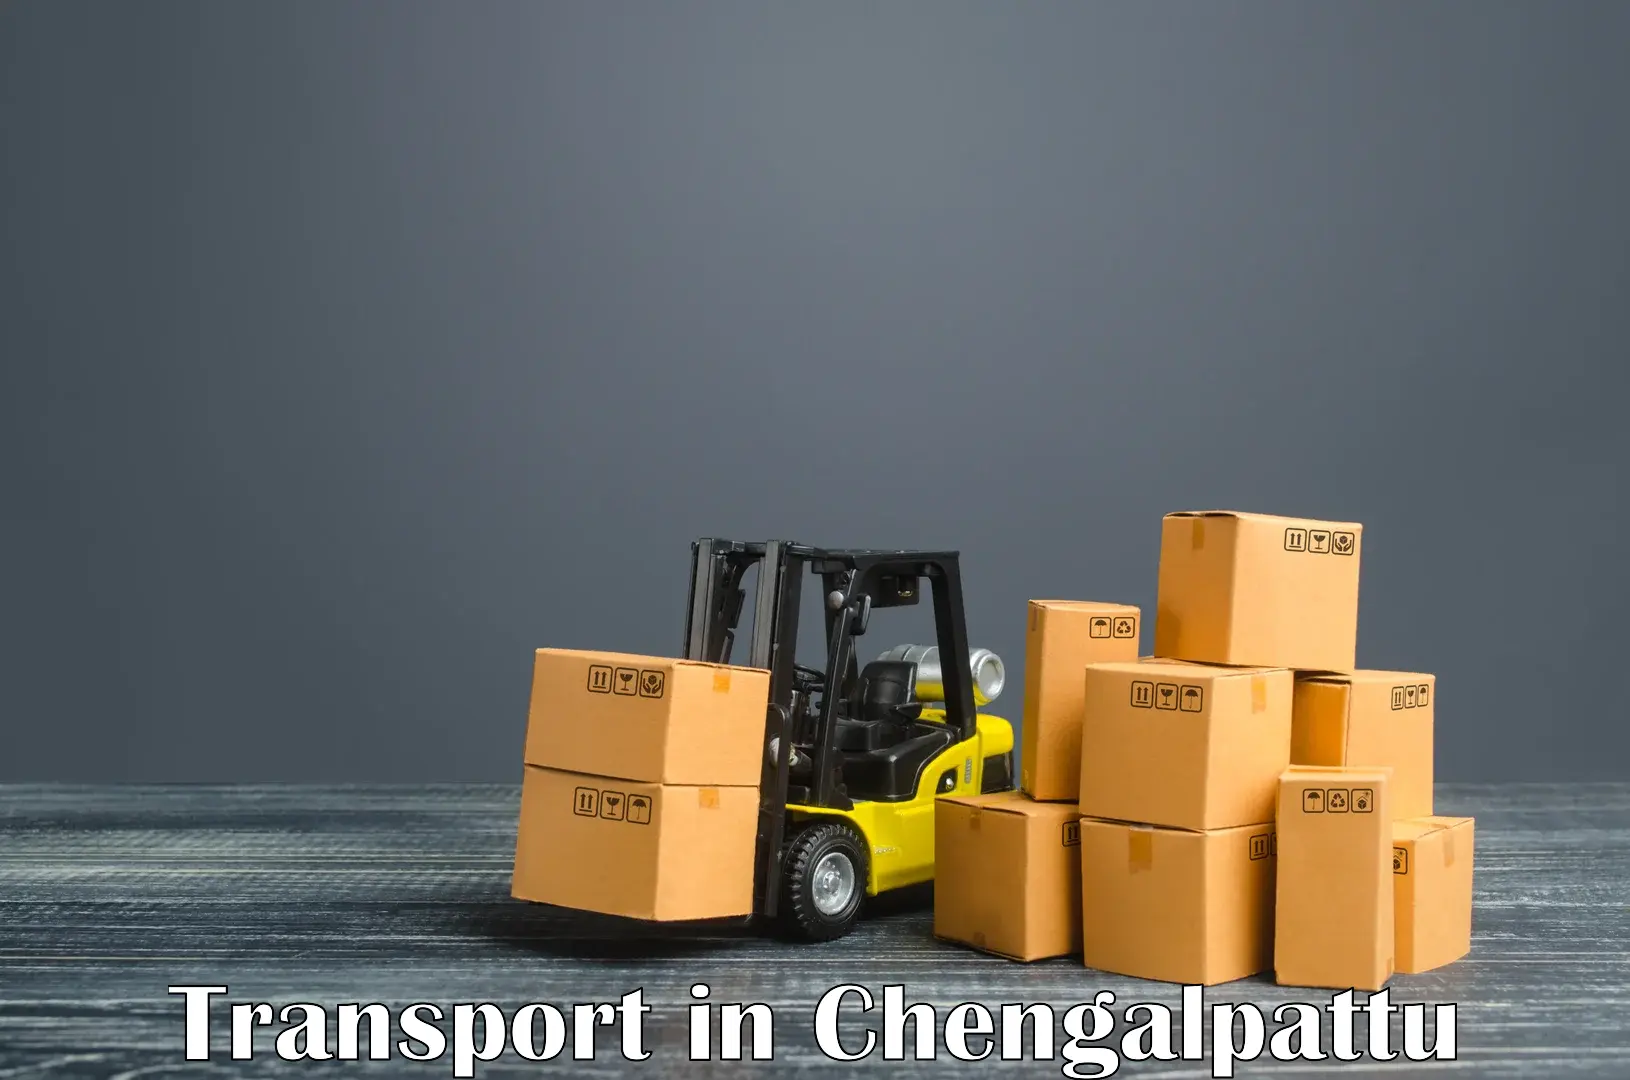 Air freight transport services in Chengalpattu